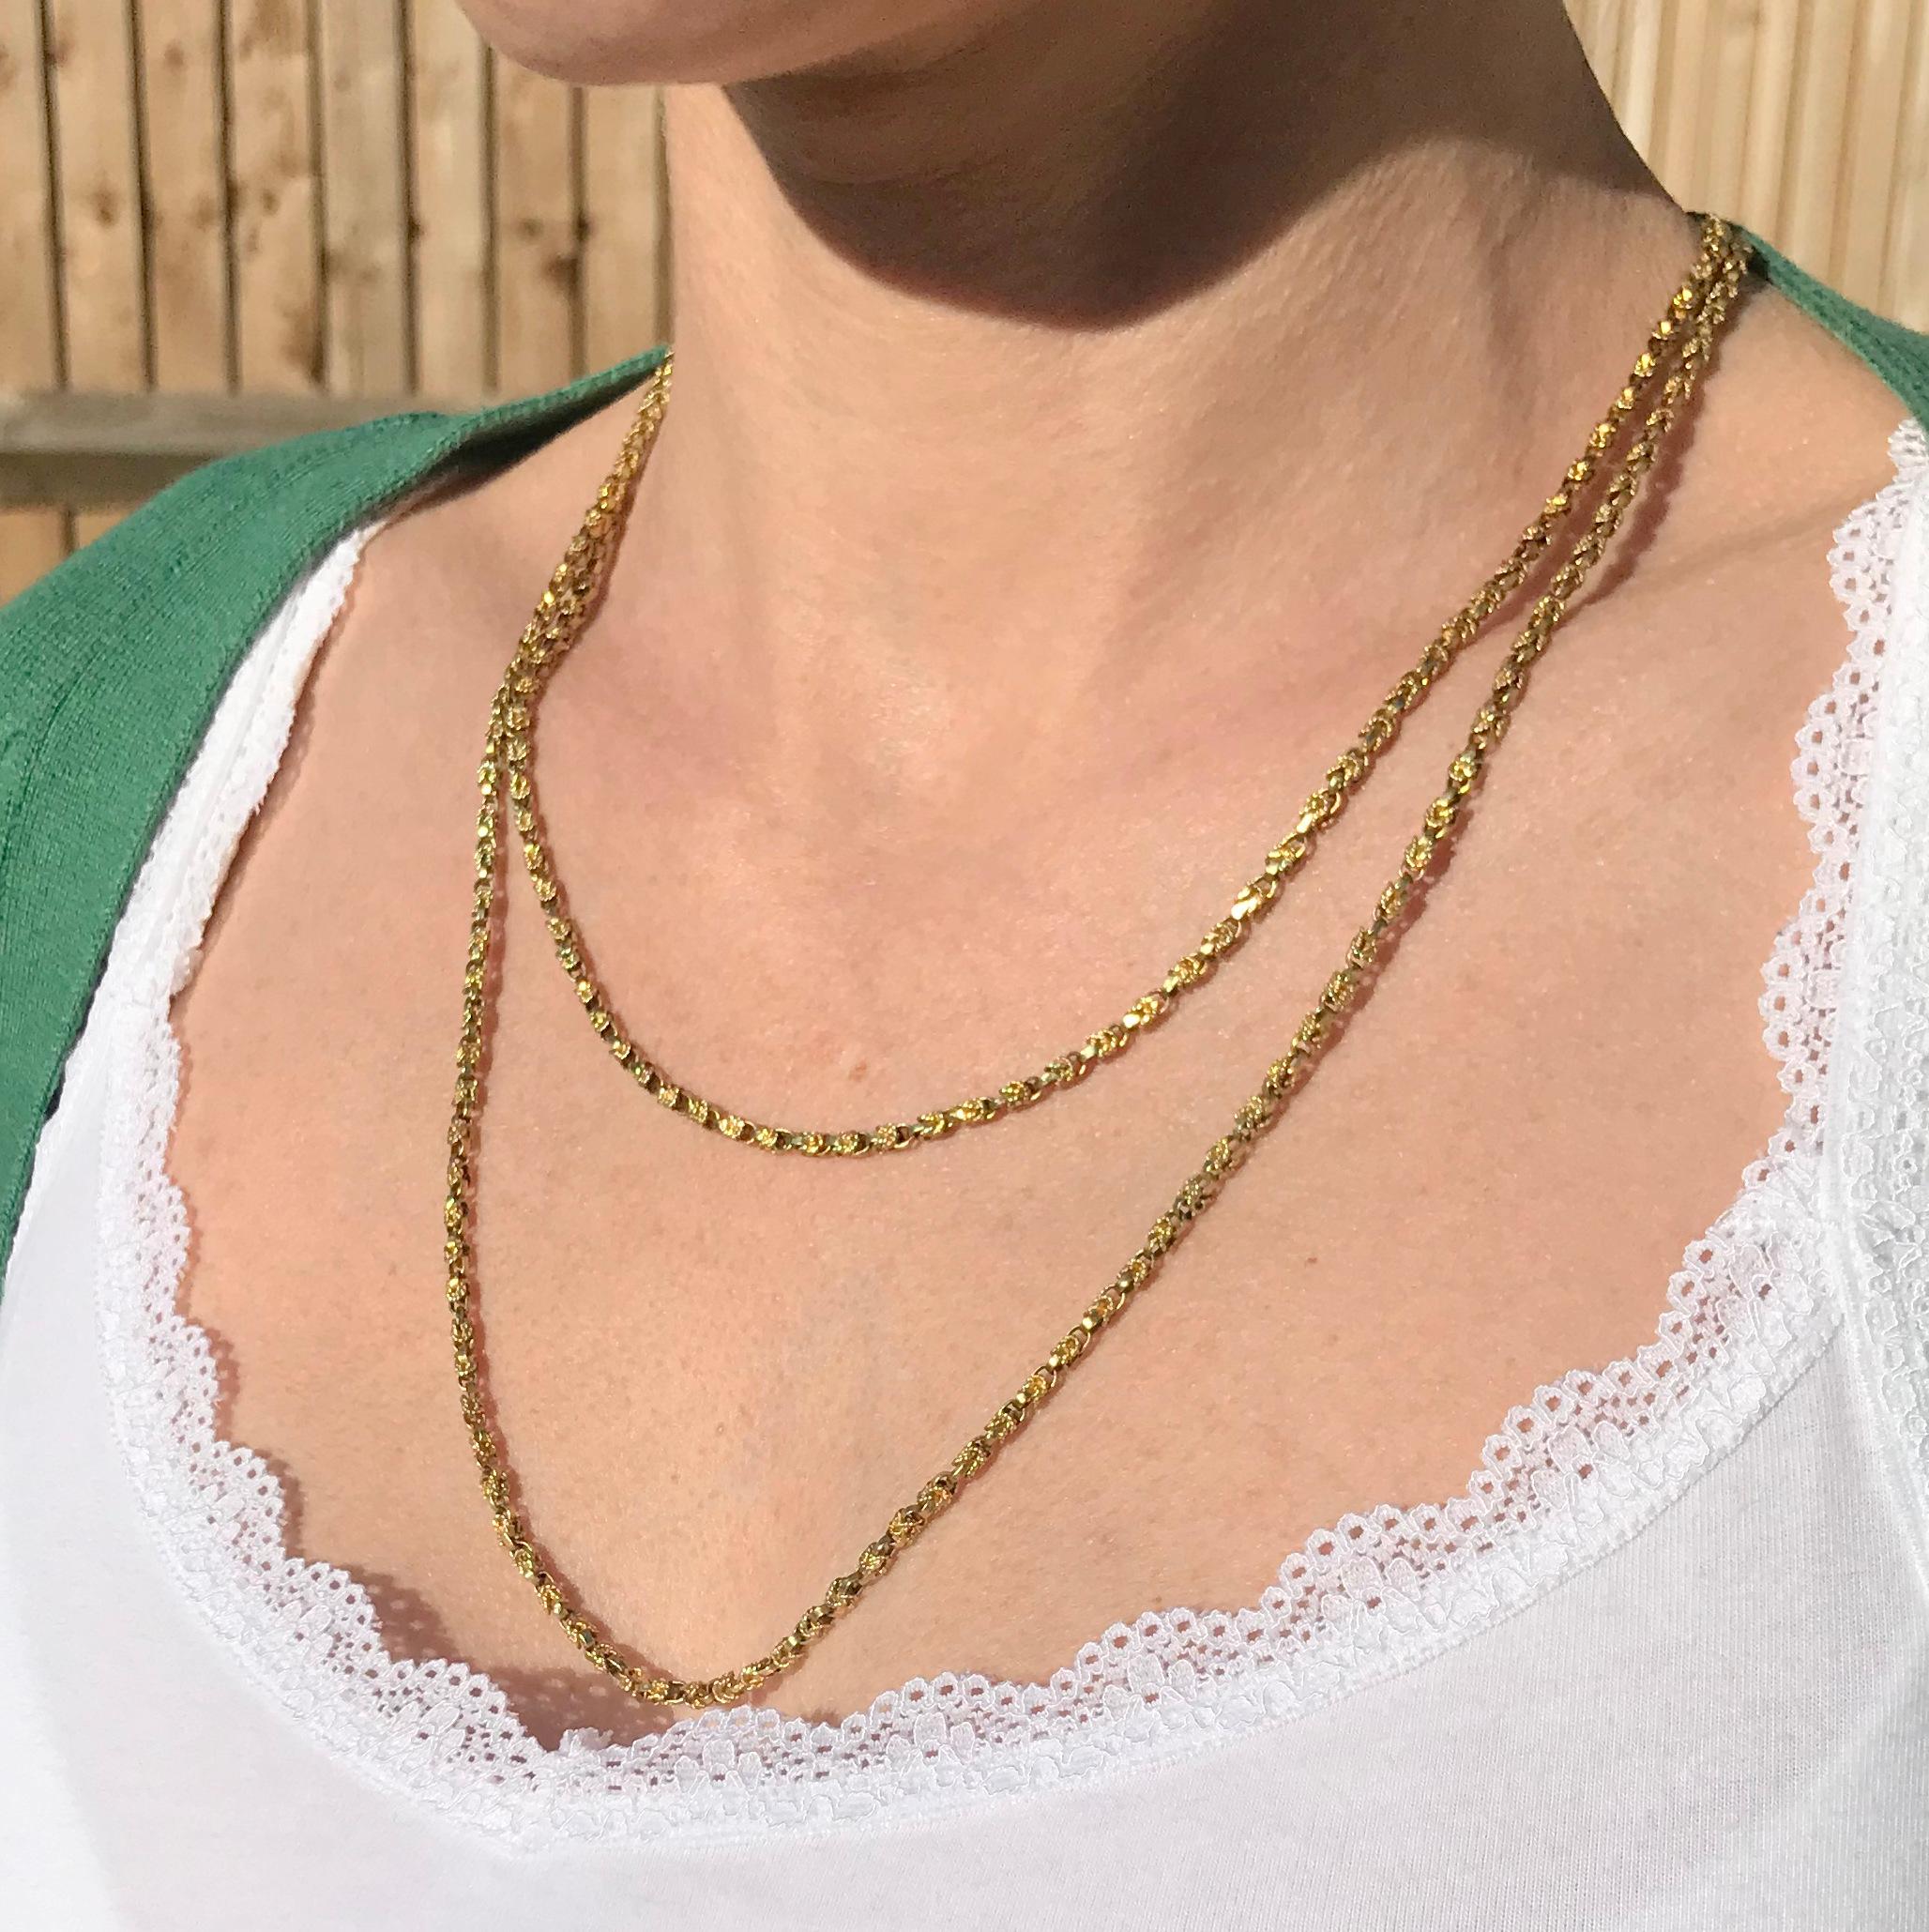 A fine and impressvie antique Victorian yellow gold longuard chain.

Each link on this belcher style chain is embellished with a knotted rope detail; an incredible craftsmanship that simply can’t be found in more modern pieces. By virtue of its